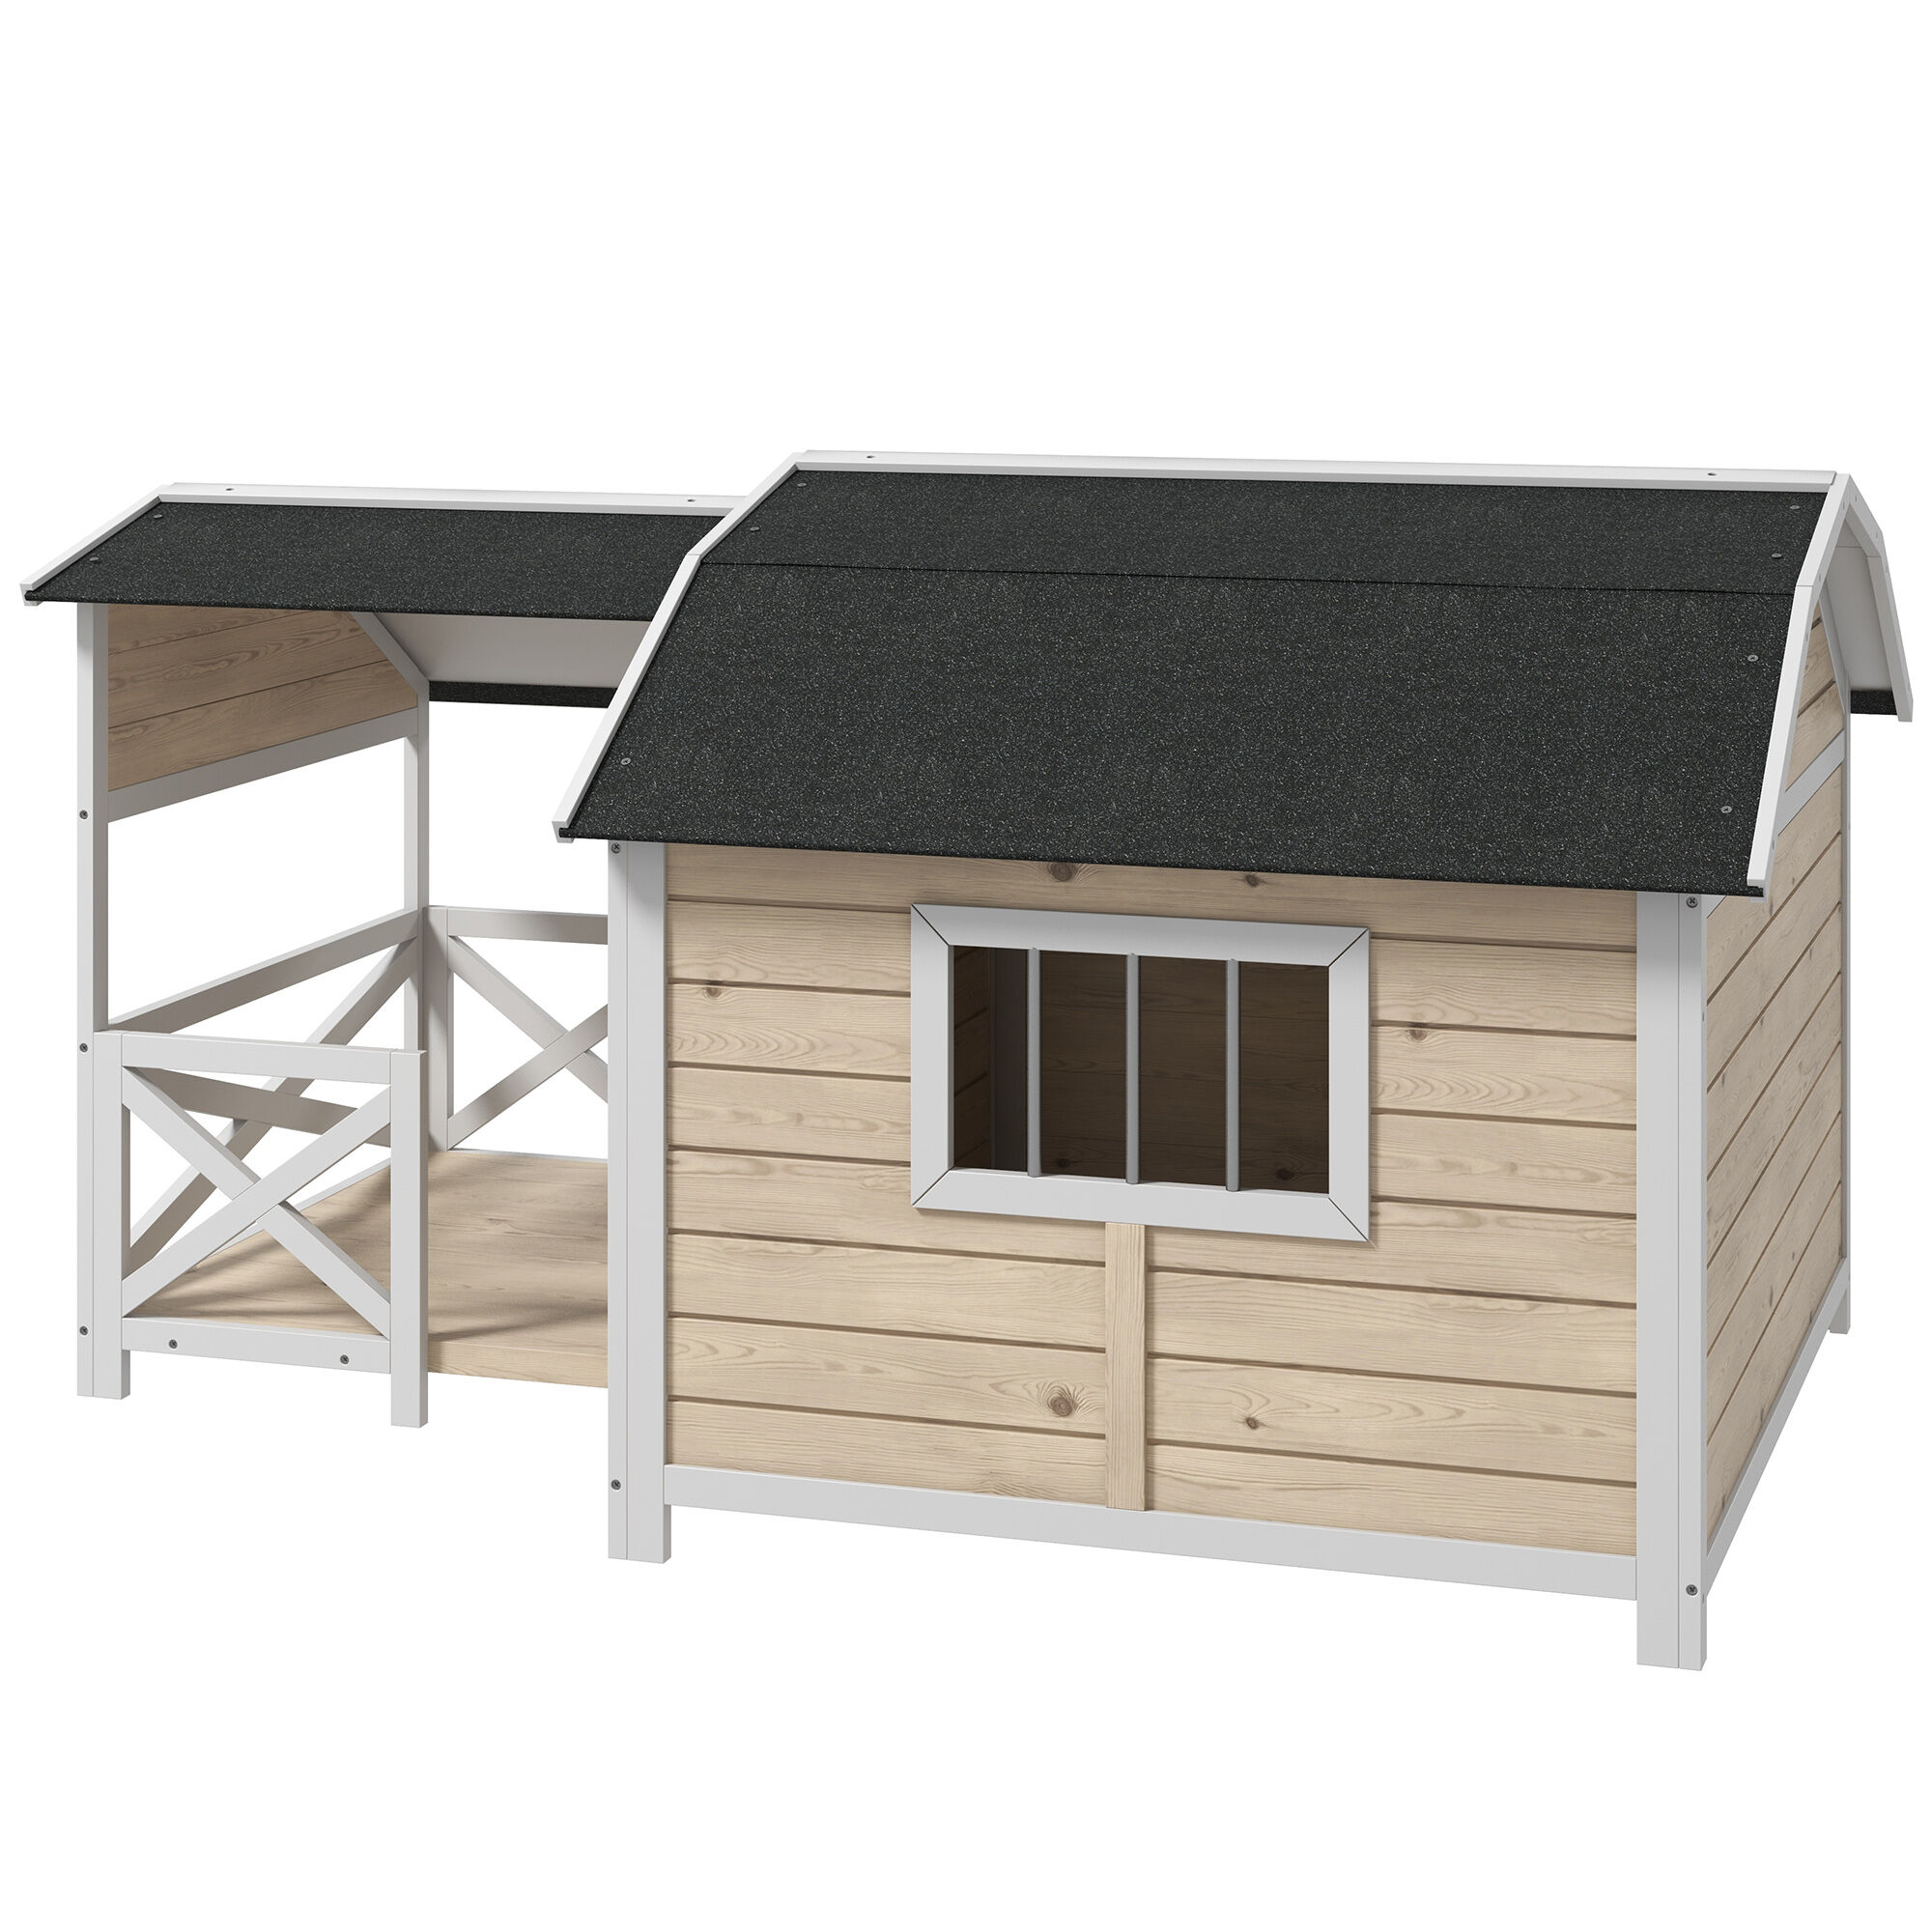 PawHut Wooden Dog House Gray Outdoor with Porch Raised Pet Kennel Asphalt Roof Front Door Side Windows for Medium Large Dogs   Aosom.com